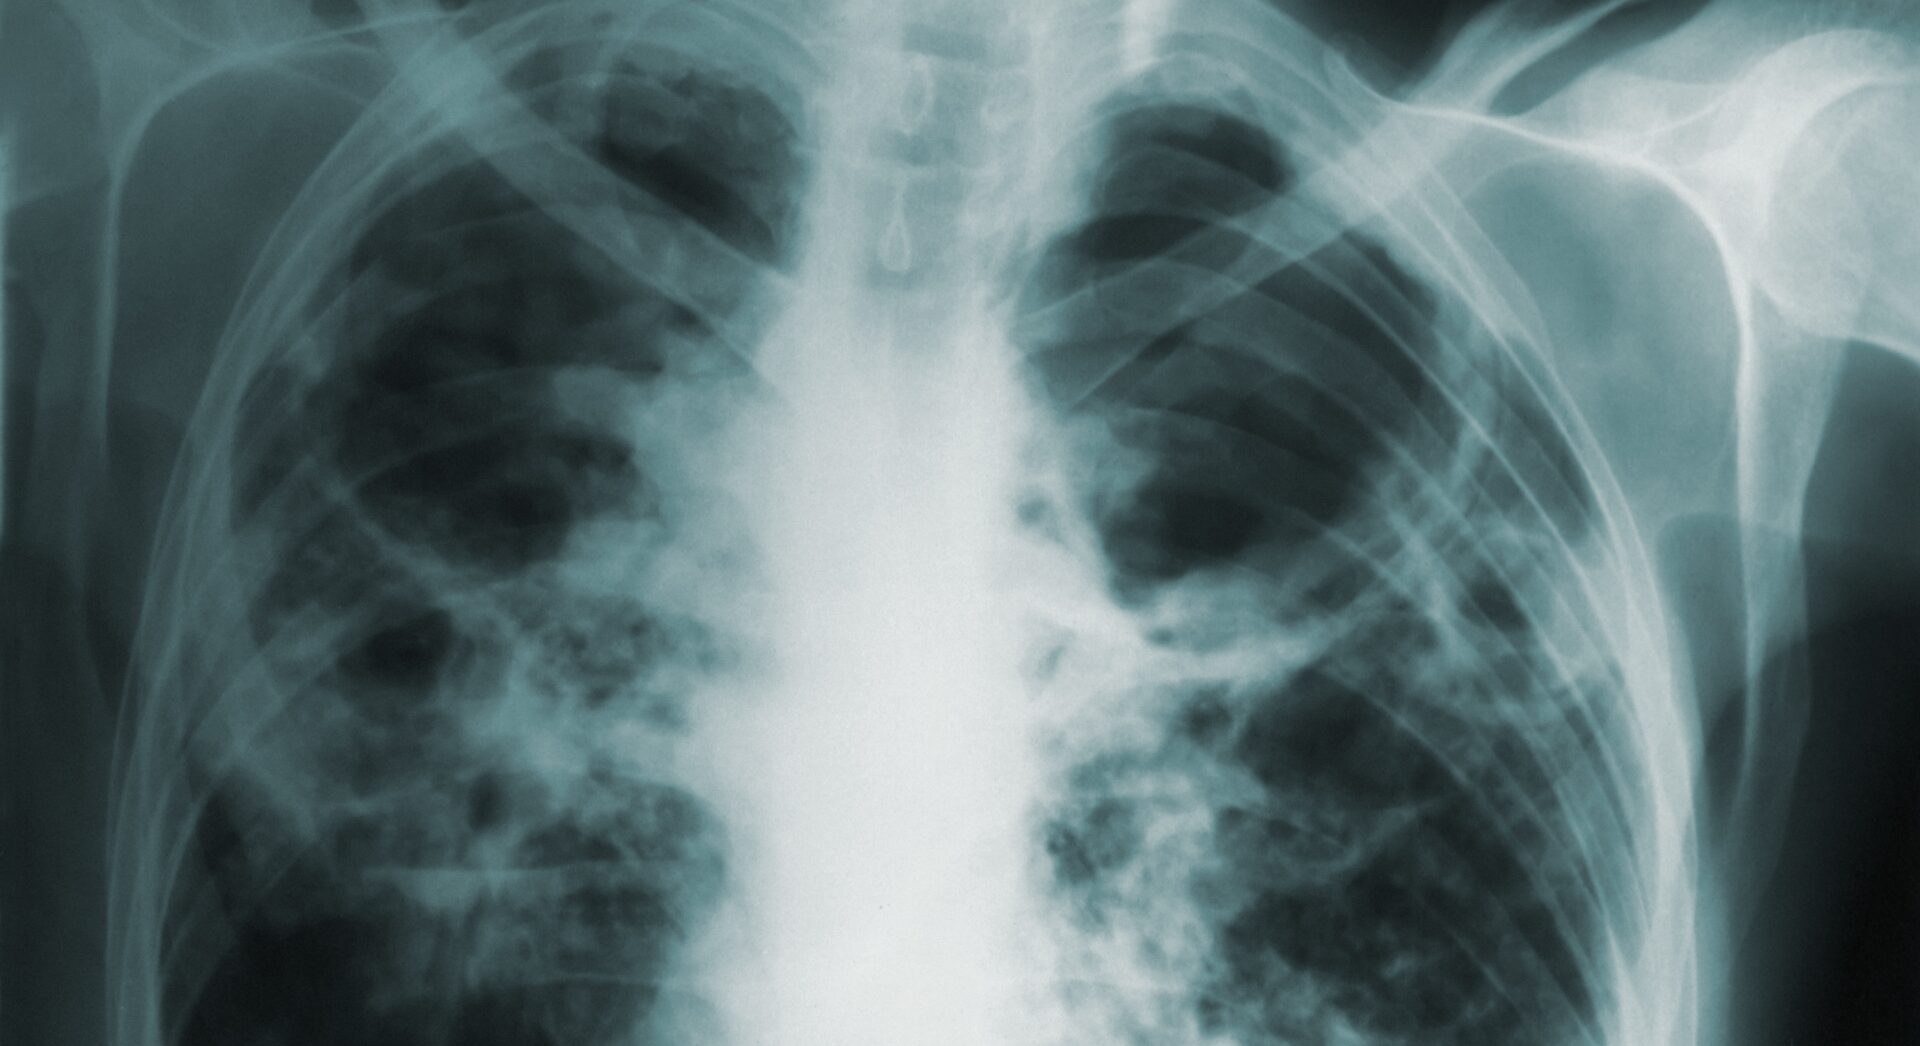 Explainable identification of lung abnormalities in chest X-ray and CT imaging